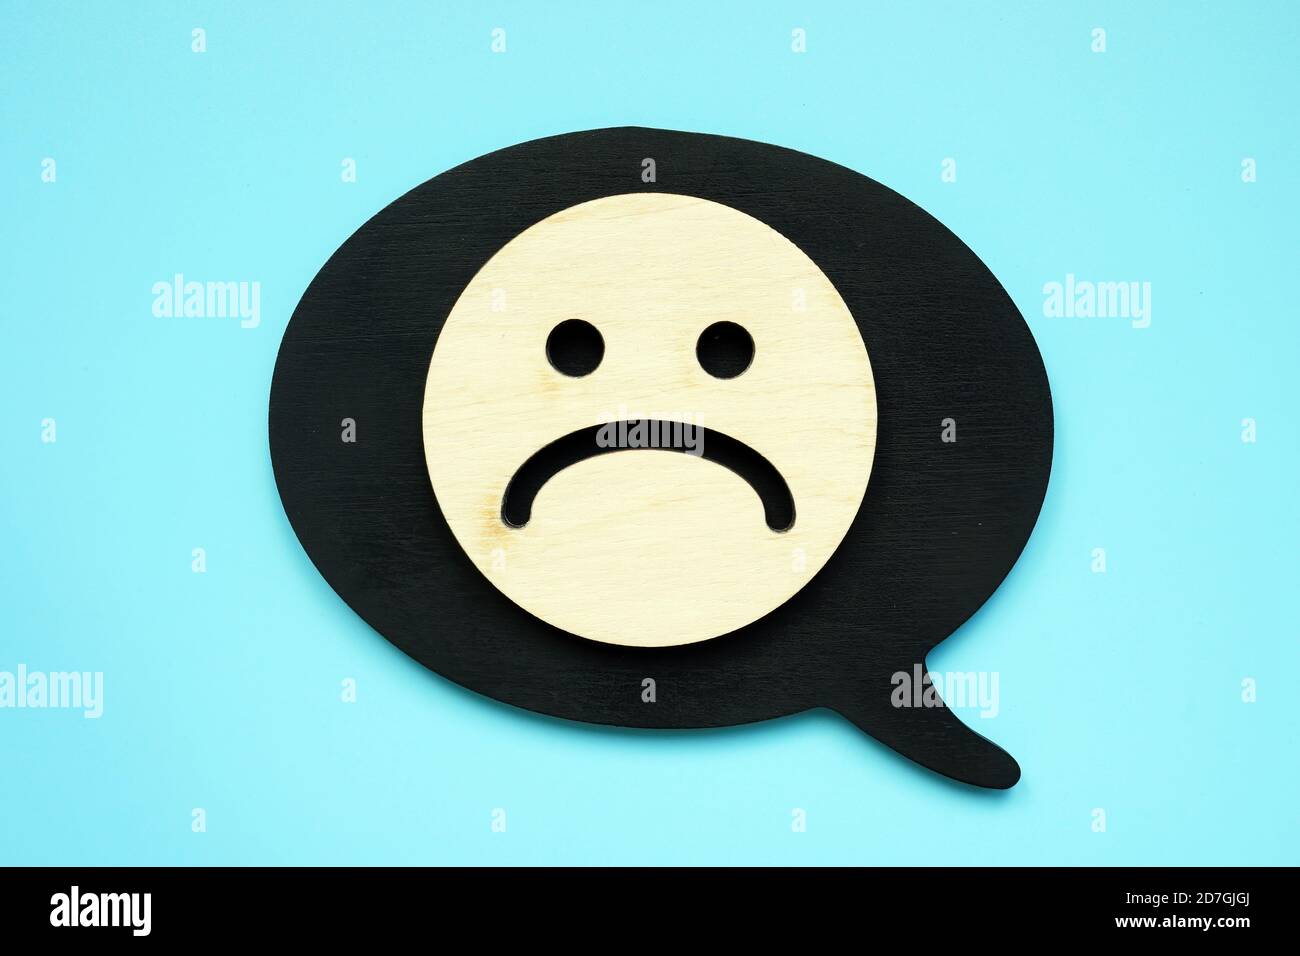 Sad face as symbol of negative feedback or review. Stock Photo